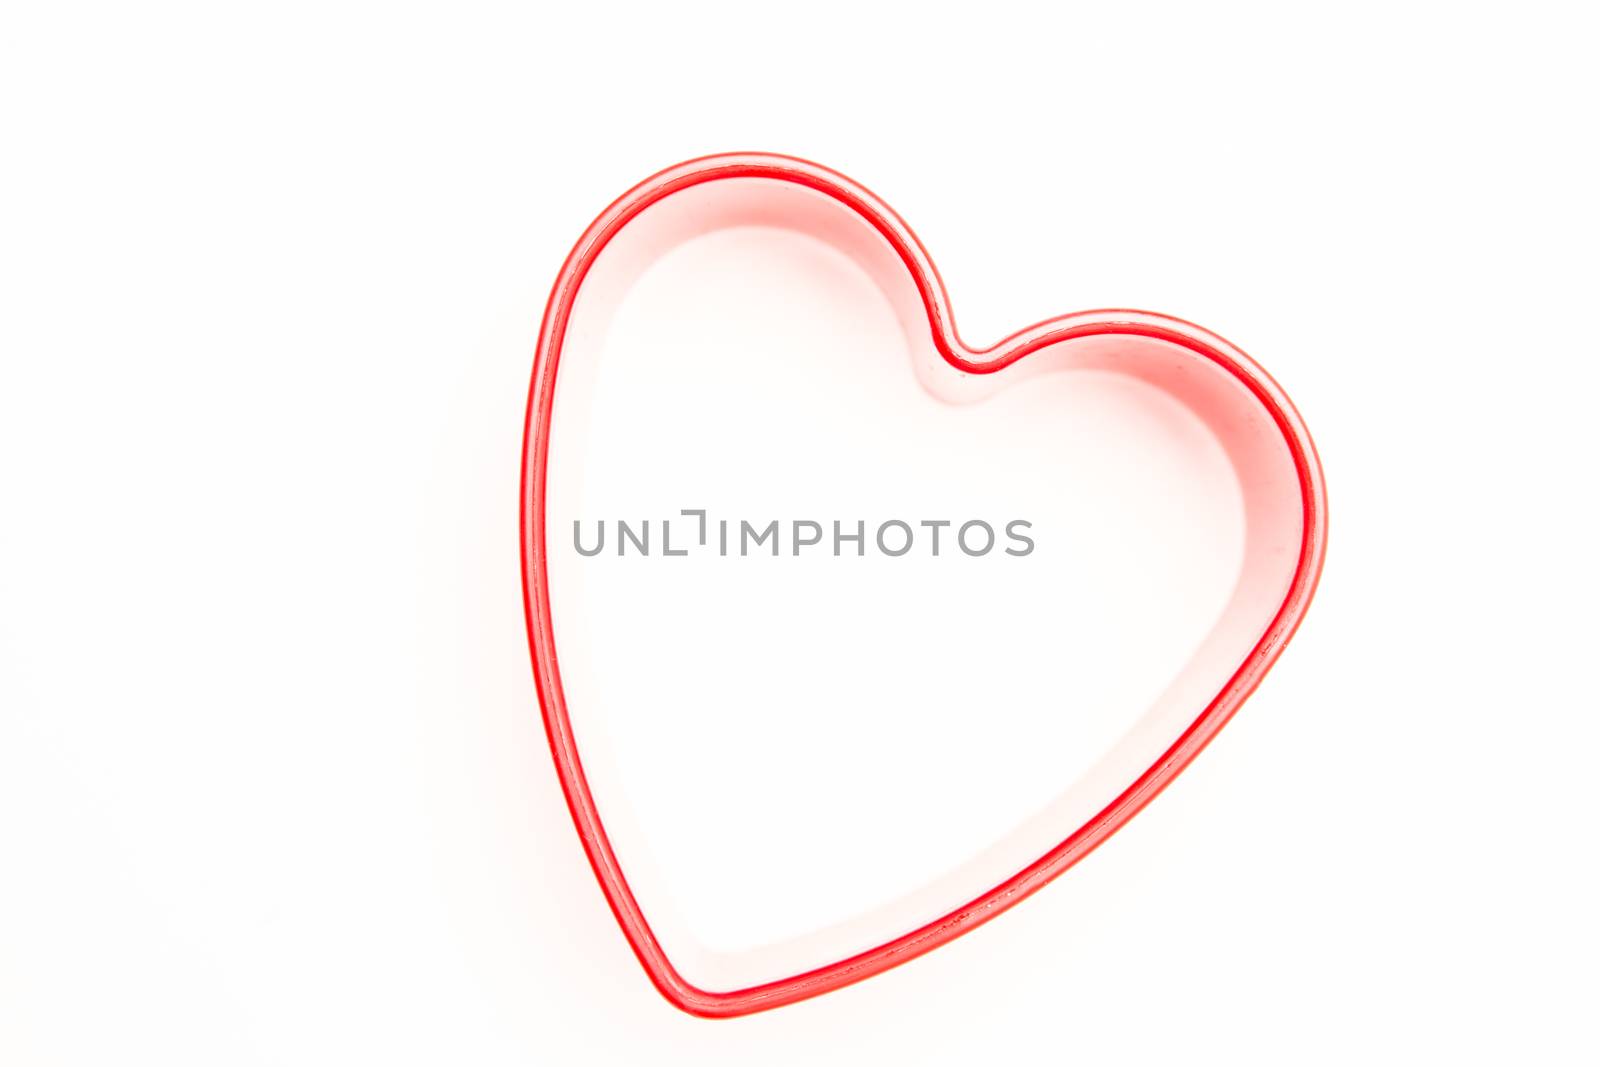 Heart shaped cookie cutter on white background